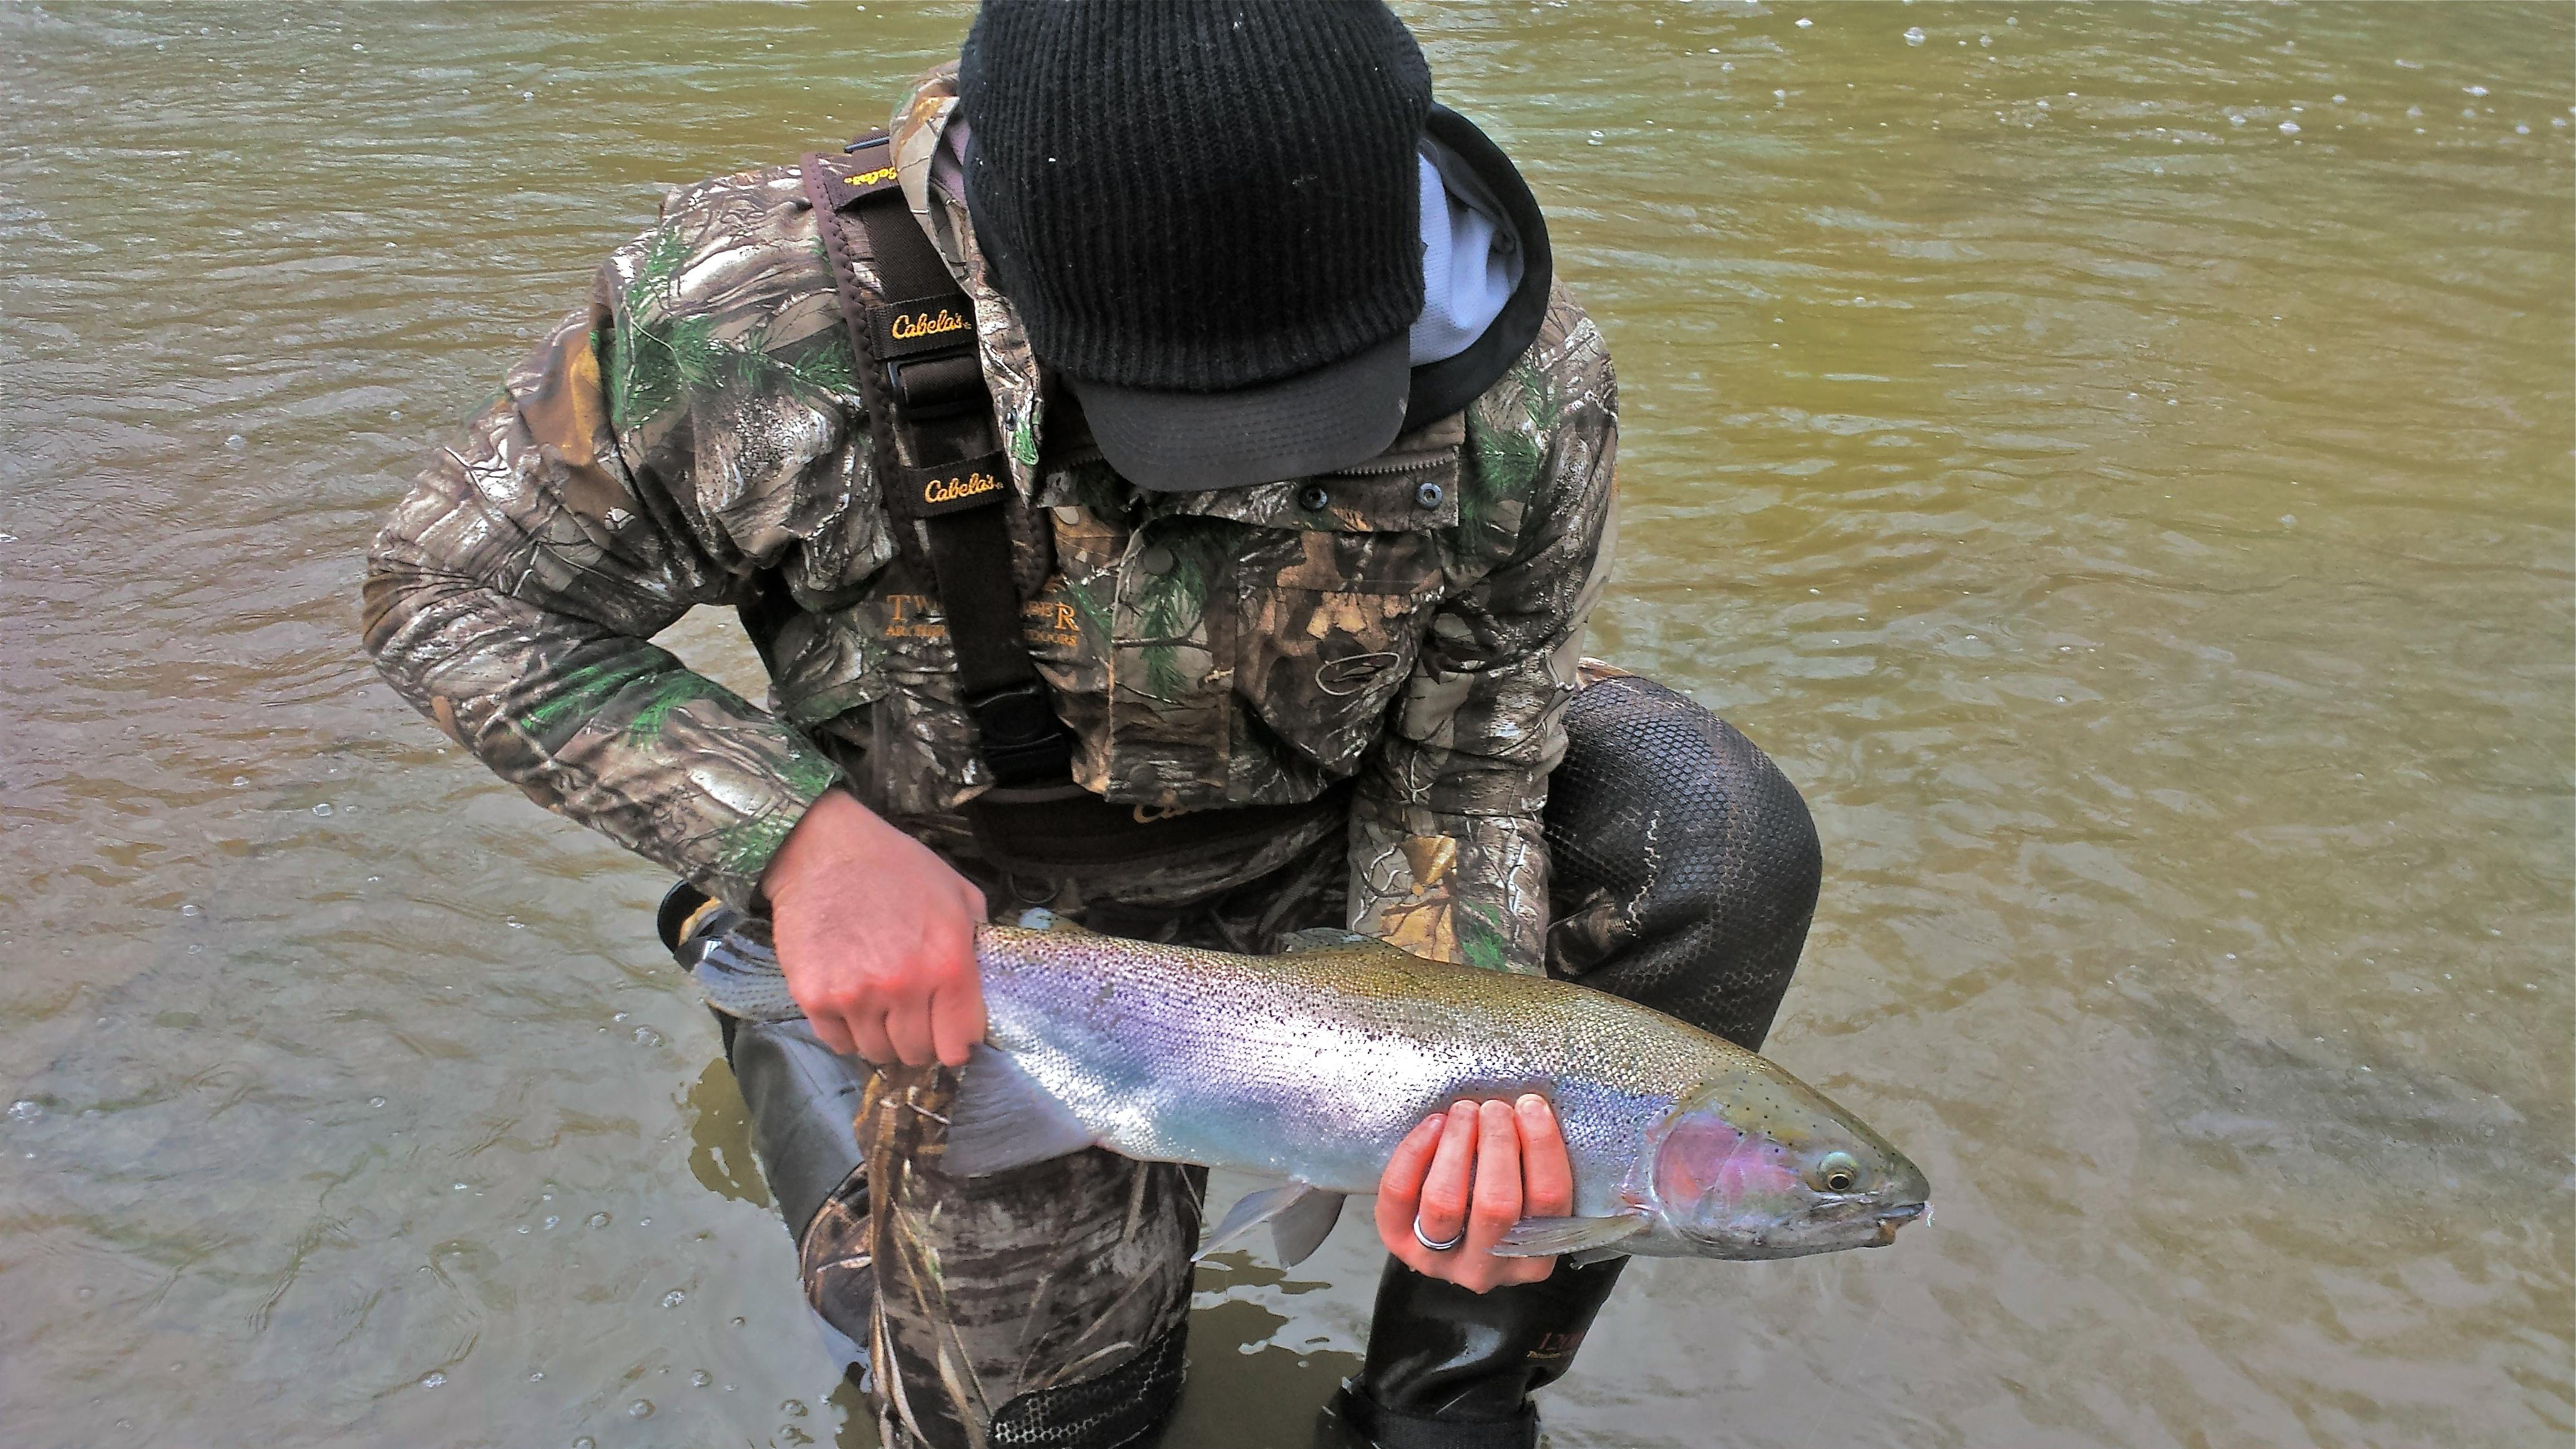 An Expert Guide to the 10 Best Fly Fishing Destinations in the U.S.